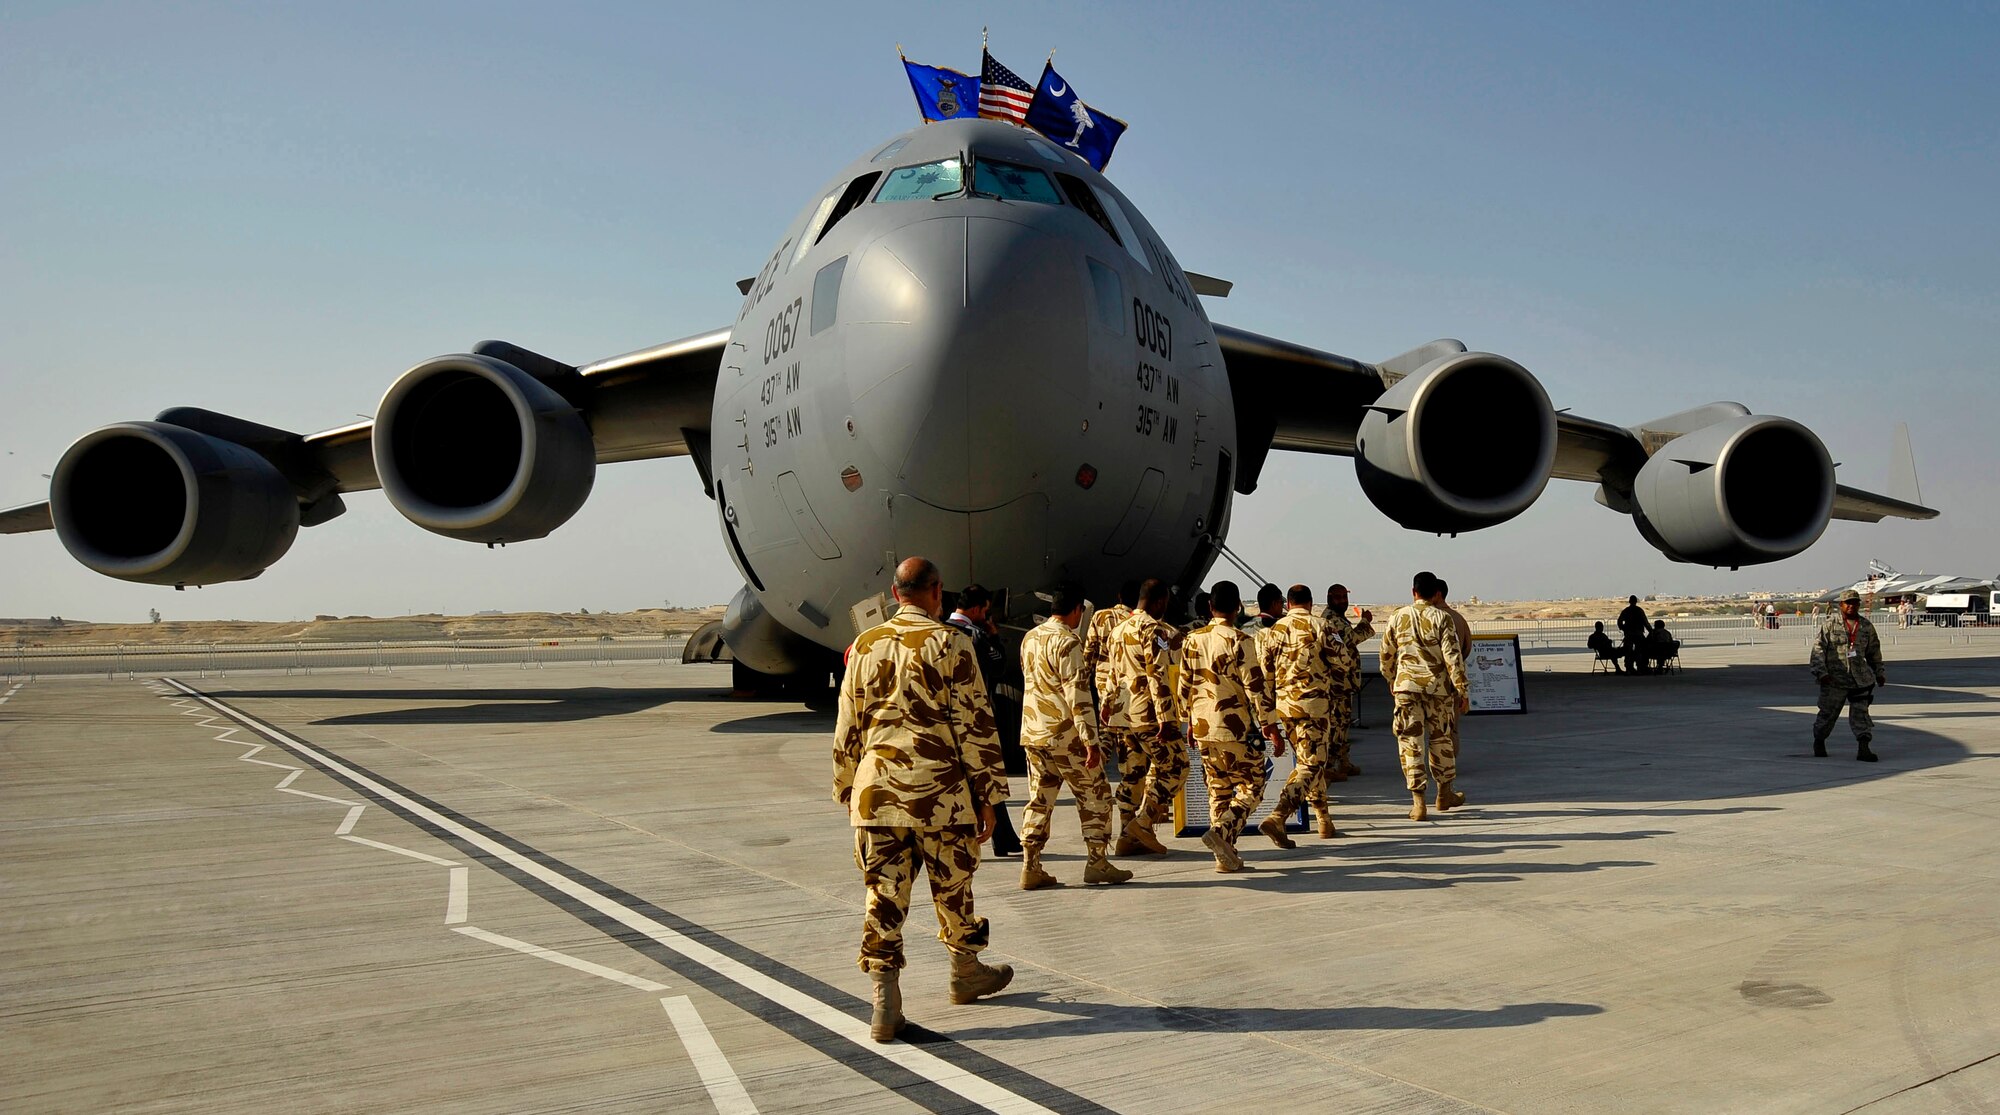 U.S. Air Force Airmen escort members of the Bahraini Royal Air Force onto a C-17 Globemaster III for a tour of the aircraft during the Bahrain International Airshow Jan. 21, 2010.   (U.S. Air Force photo/Staff Sgt. Angelita Lawrence/released)